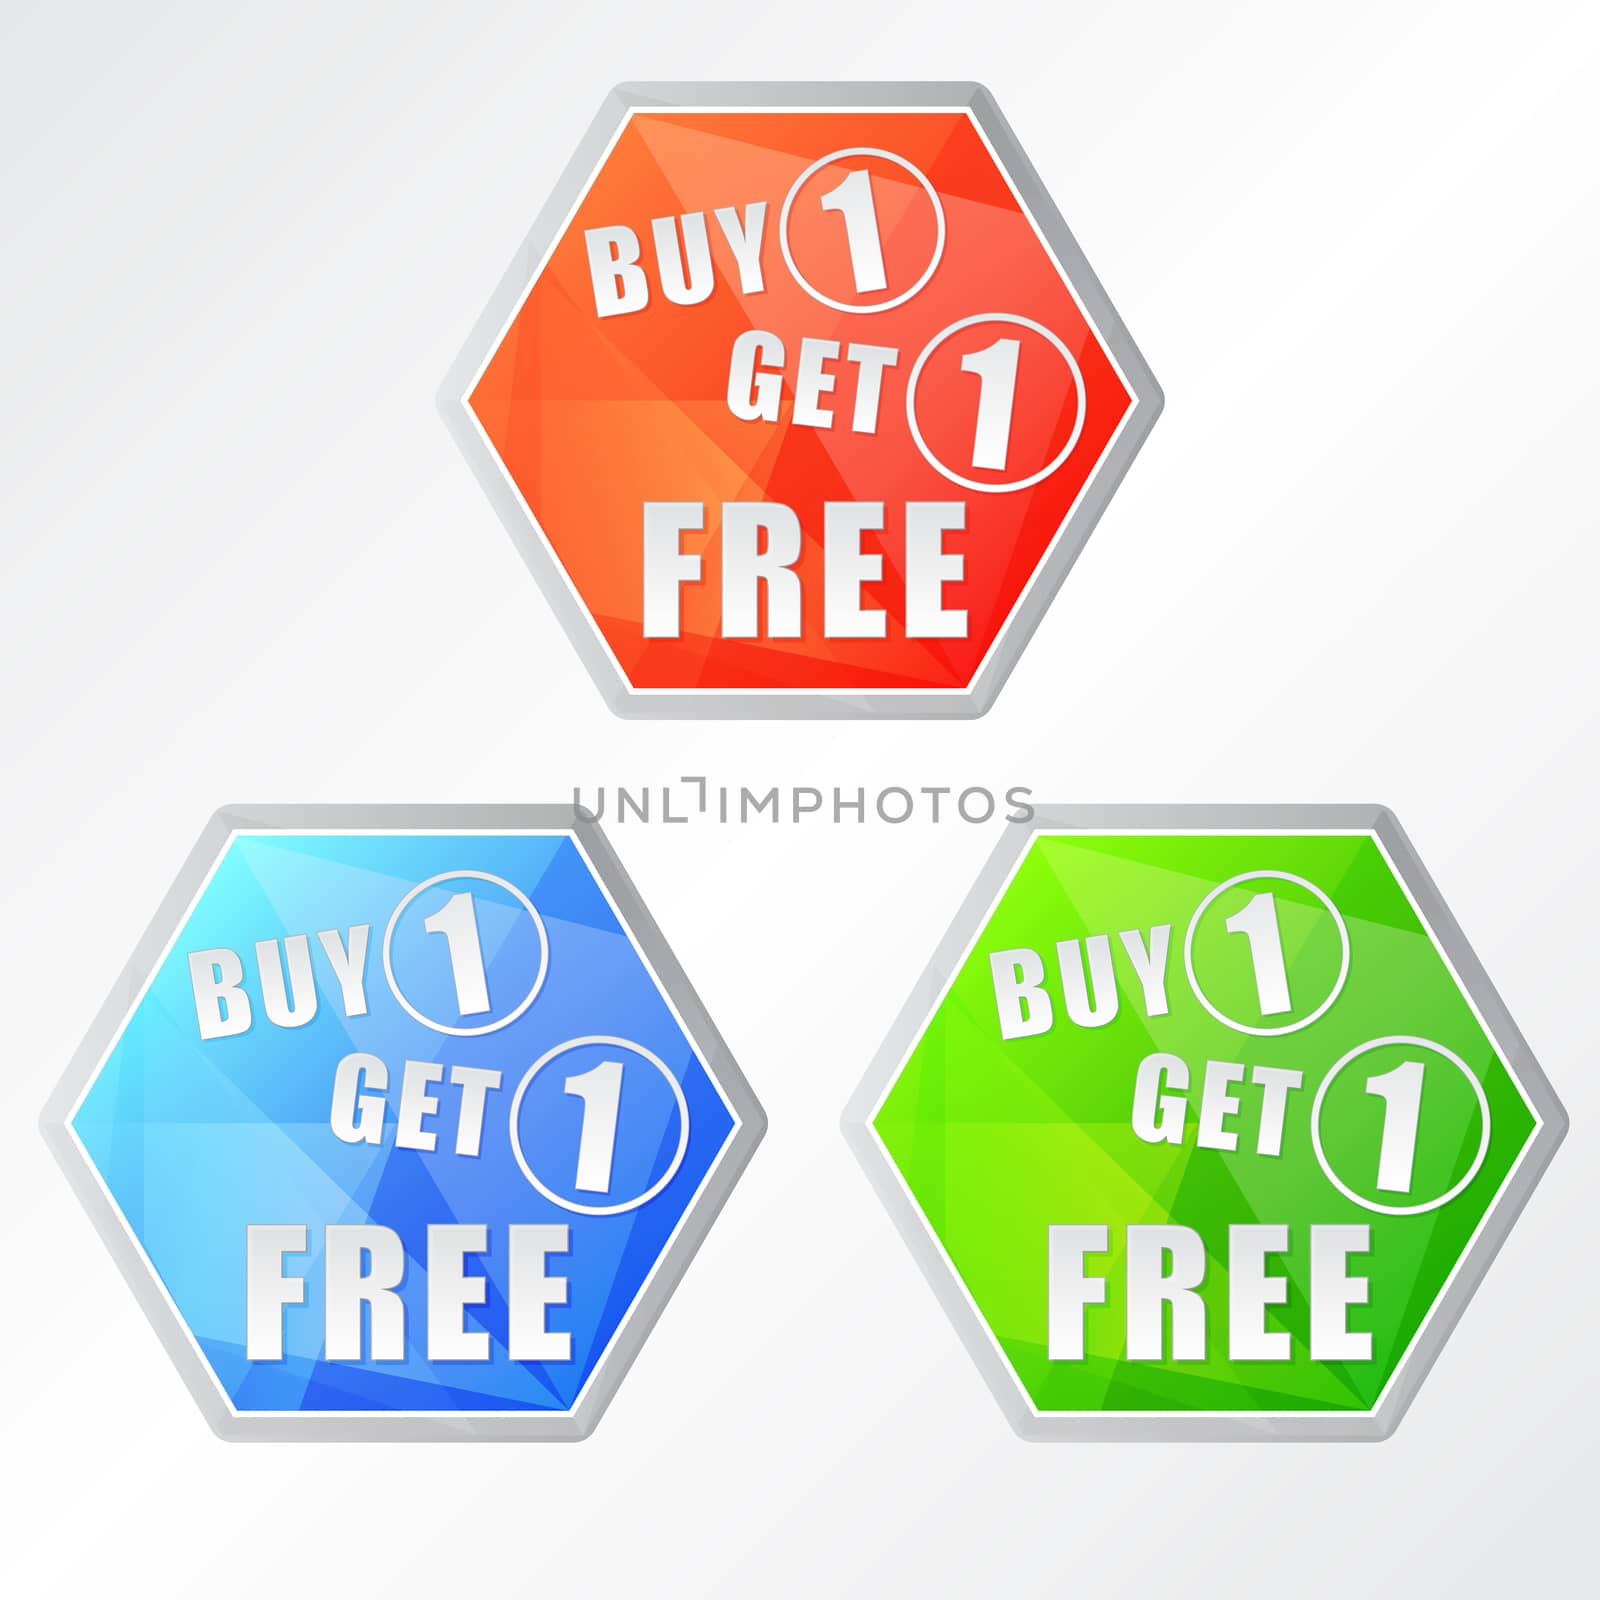 buy one get one free, three colors hexagons labels, flat design, business shopping concept